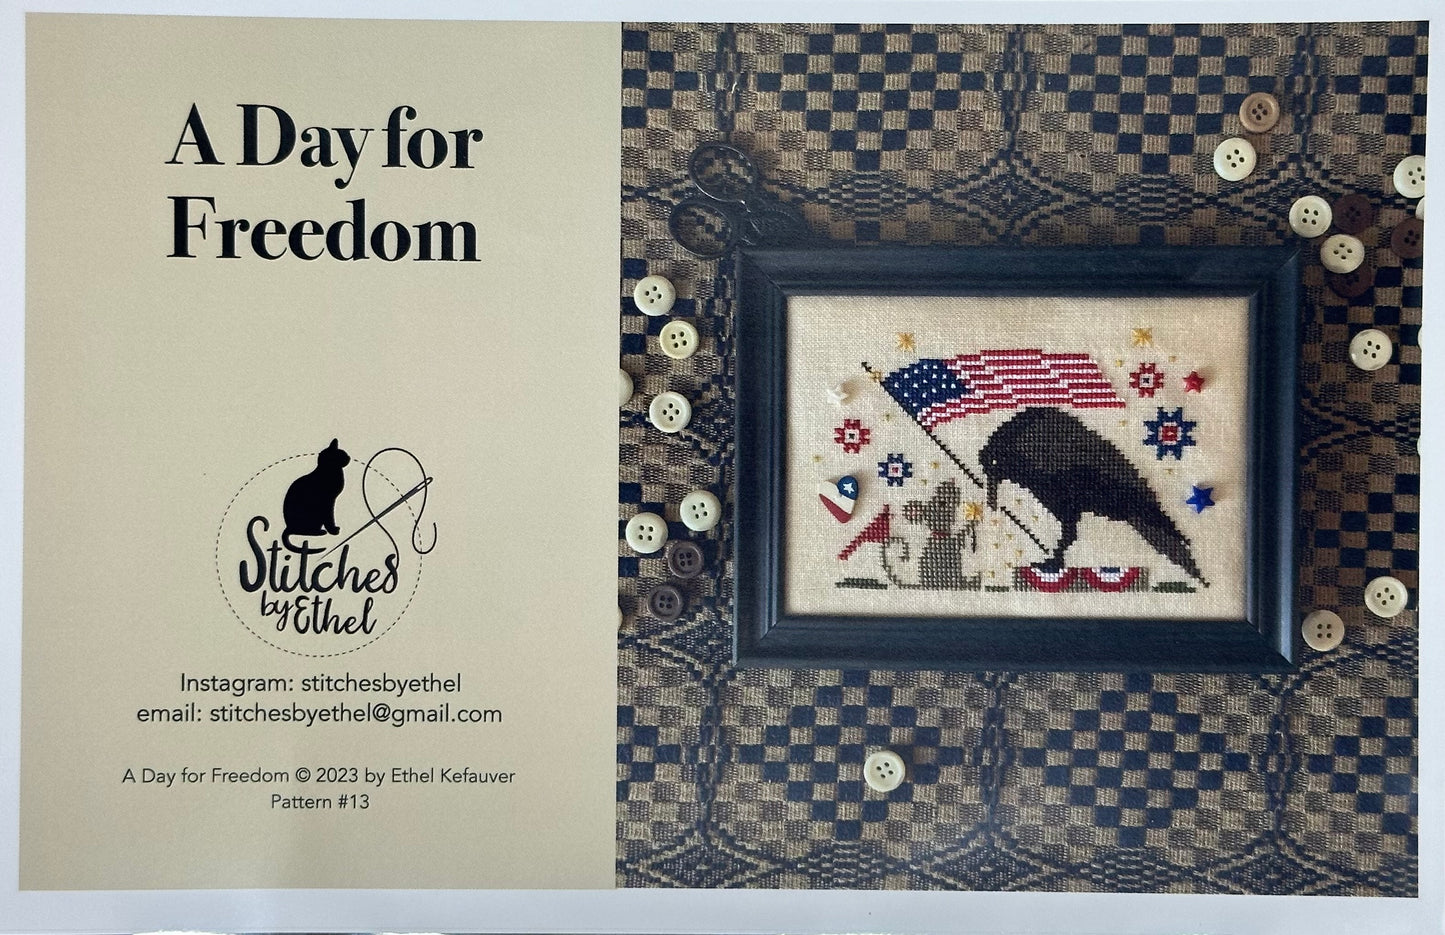 A Day for Freedom